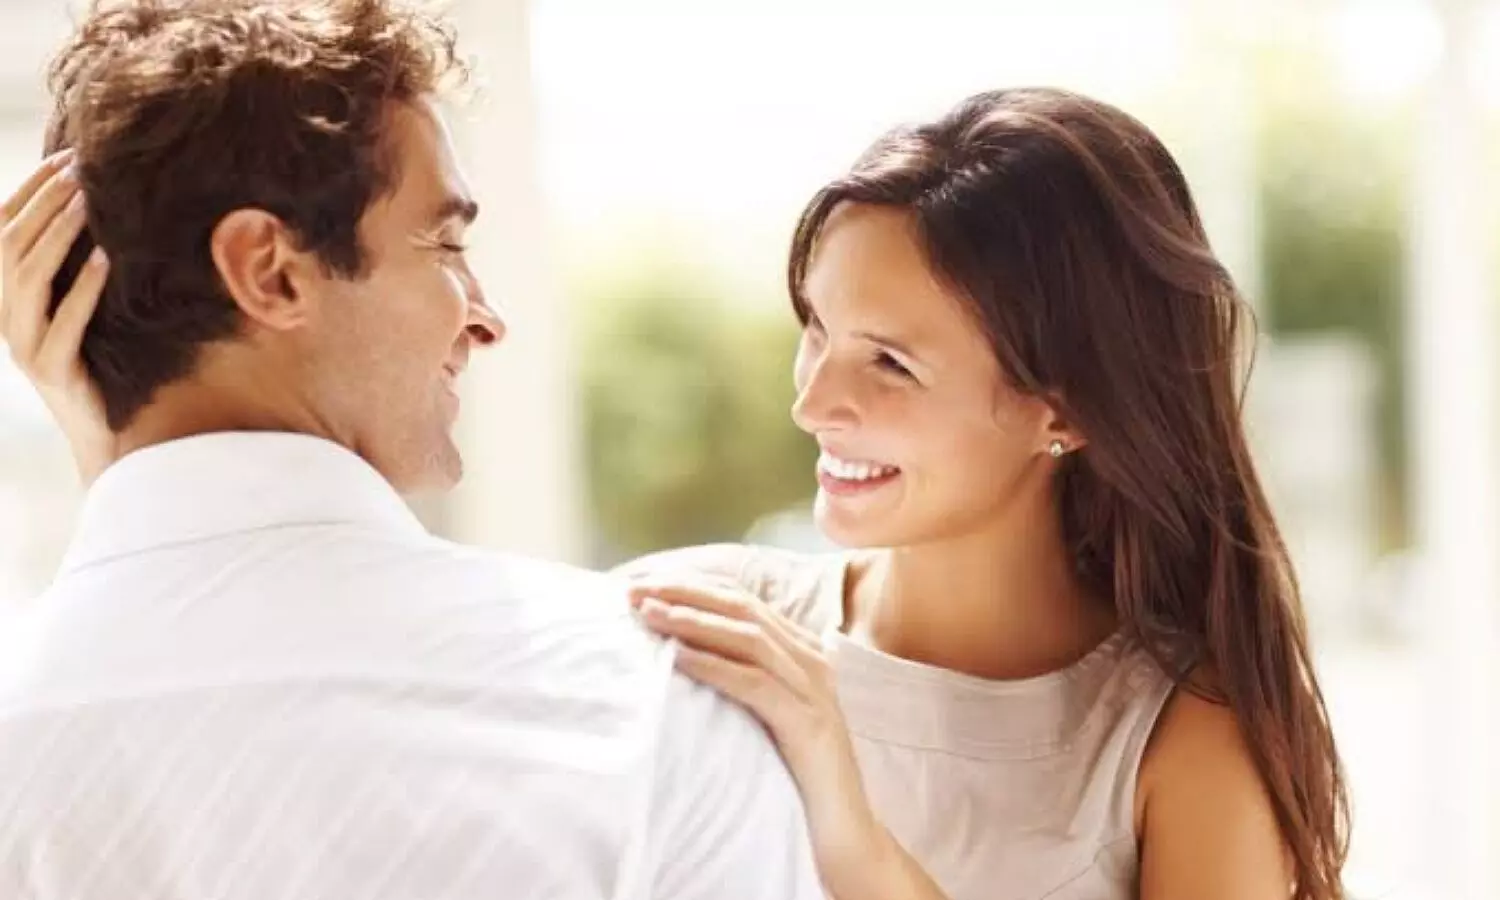 Tips to make your partner happy